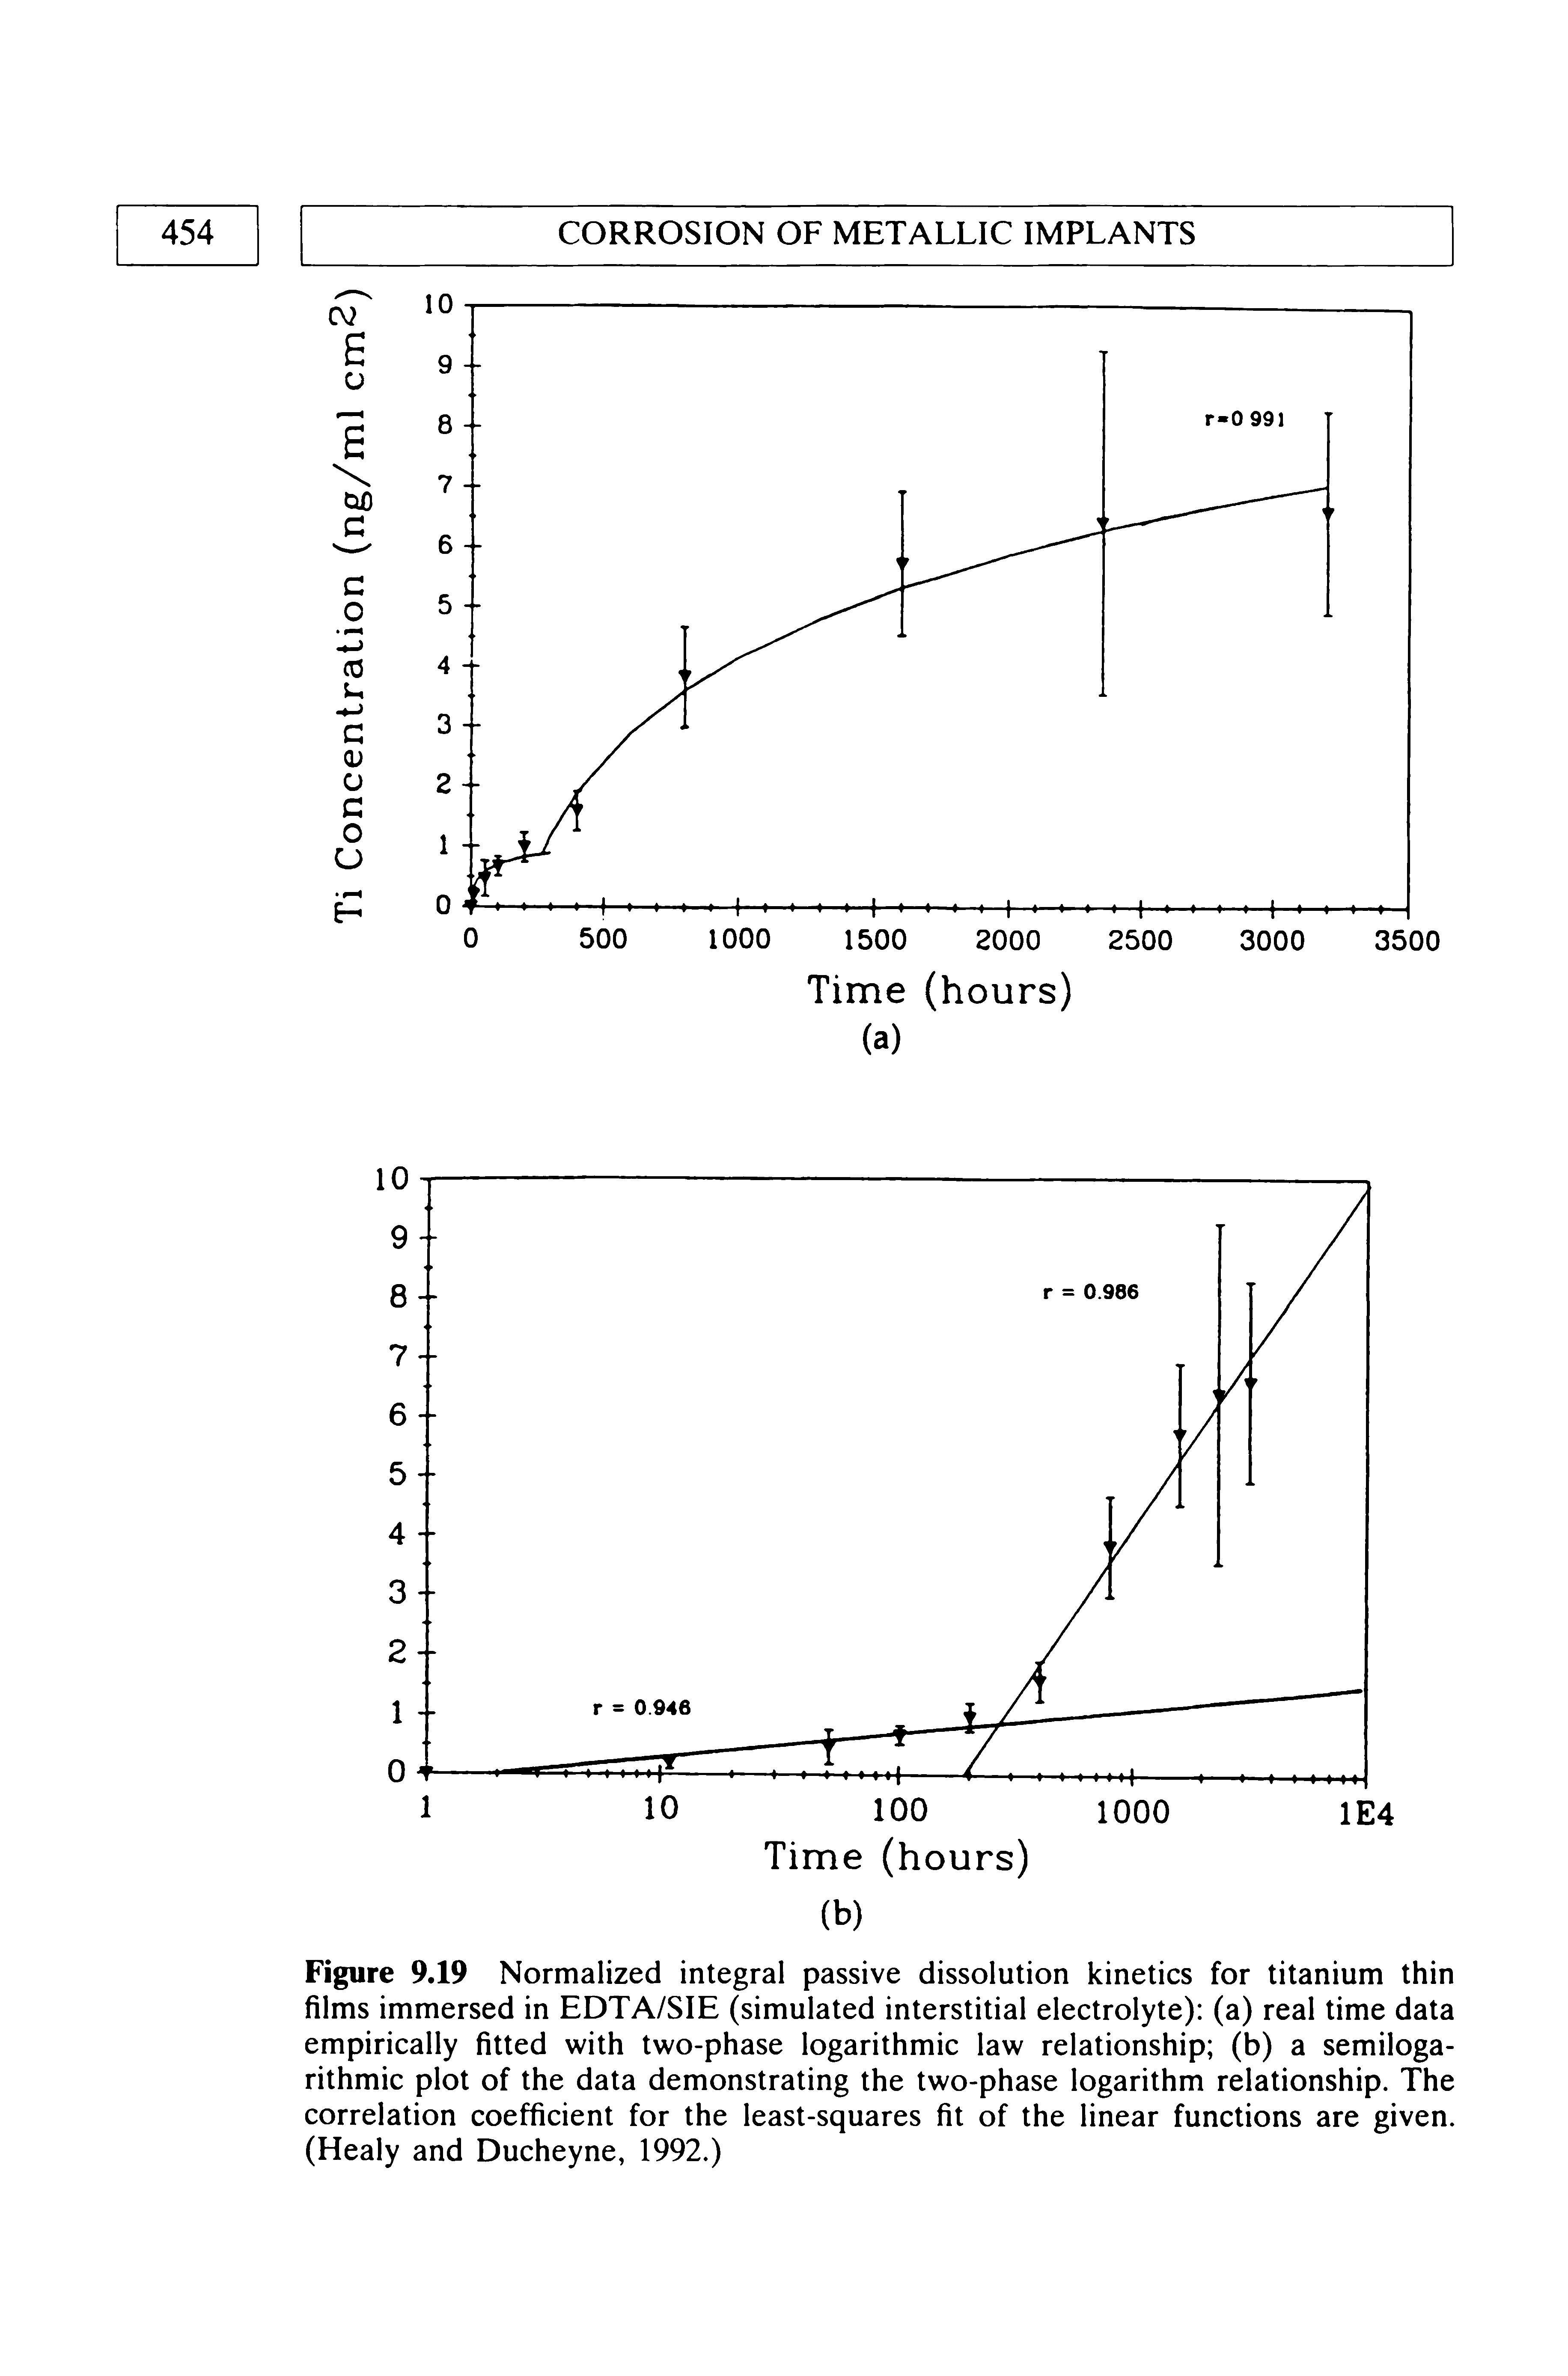 Figure 9.19 Normalized integral passive dissolution kinetics for titanium thin films immersed in EDTA/SIE (simulated interstitial electrolyte) (a) real time data empirically fitted with two-phase logarithmic law relationship (b) a semiloga-rithmic plot of the data demonstrating the two-phase logarithm relationship. The correlation coefficient for the least-squares fit of the linear functions are given. (Healy and Ducheyne, 1992.)...